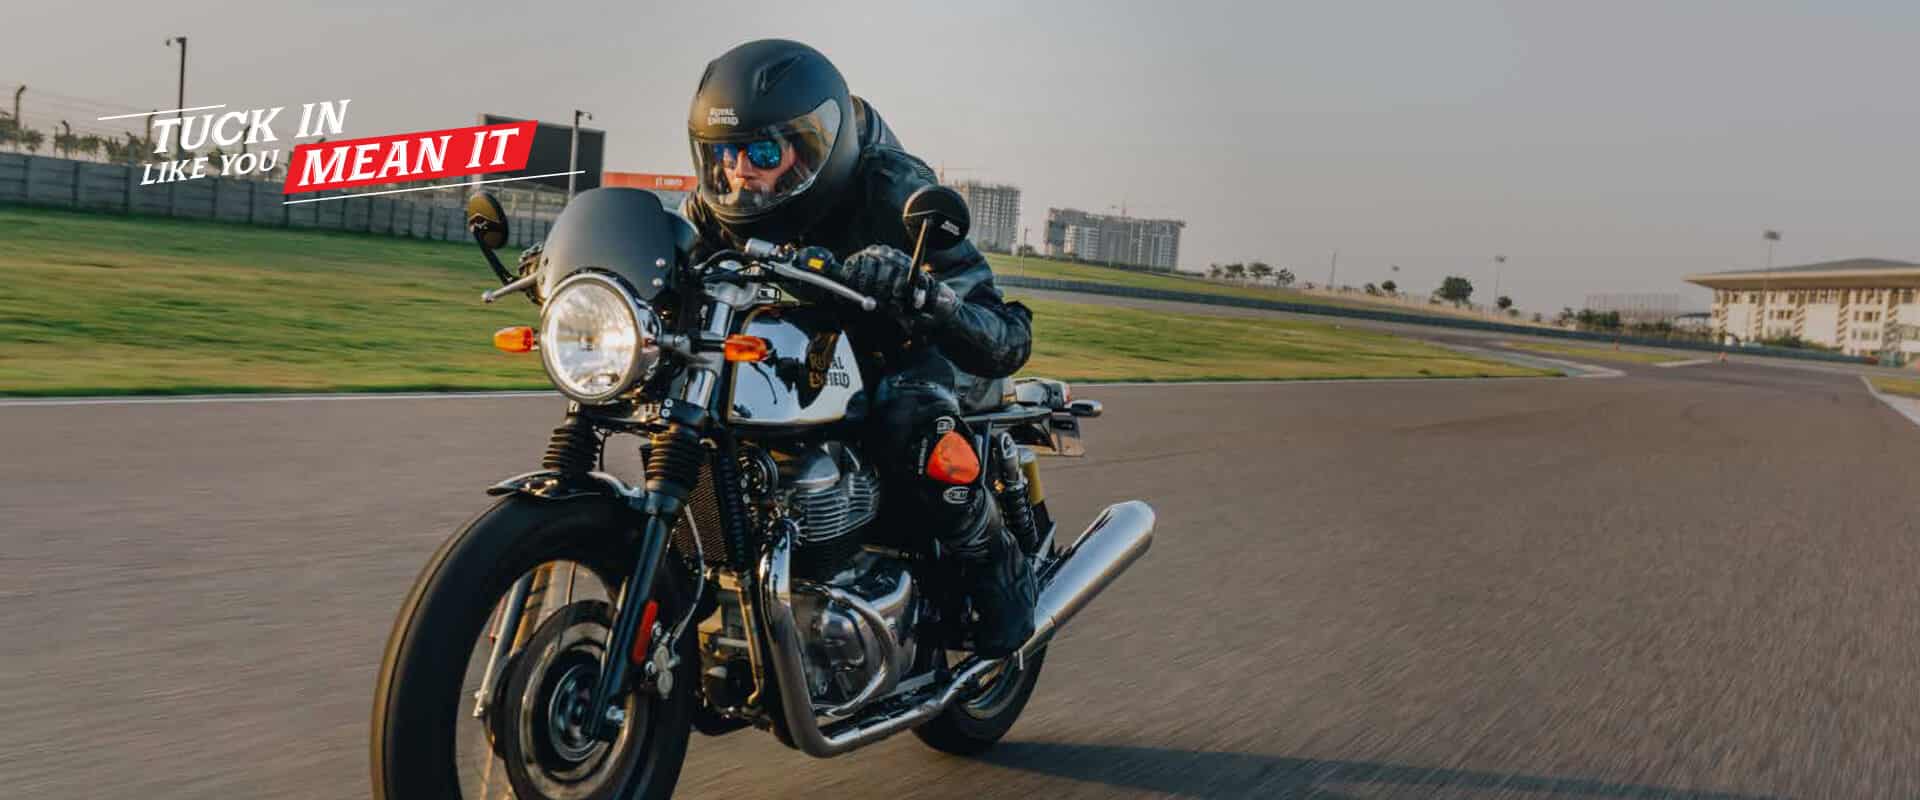 Comfortable 'tucked-in' aerodynamic riding position - Royal Enfield Continental GT